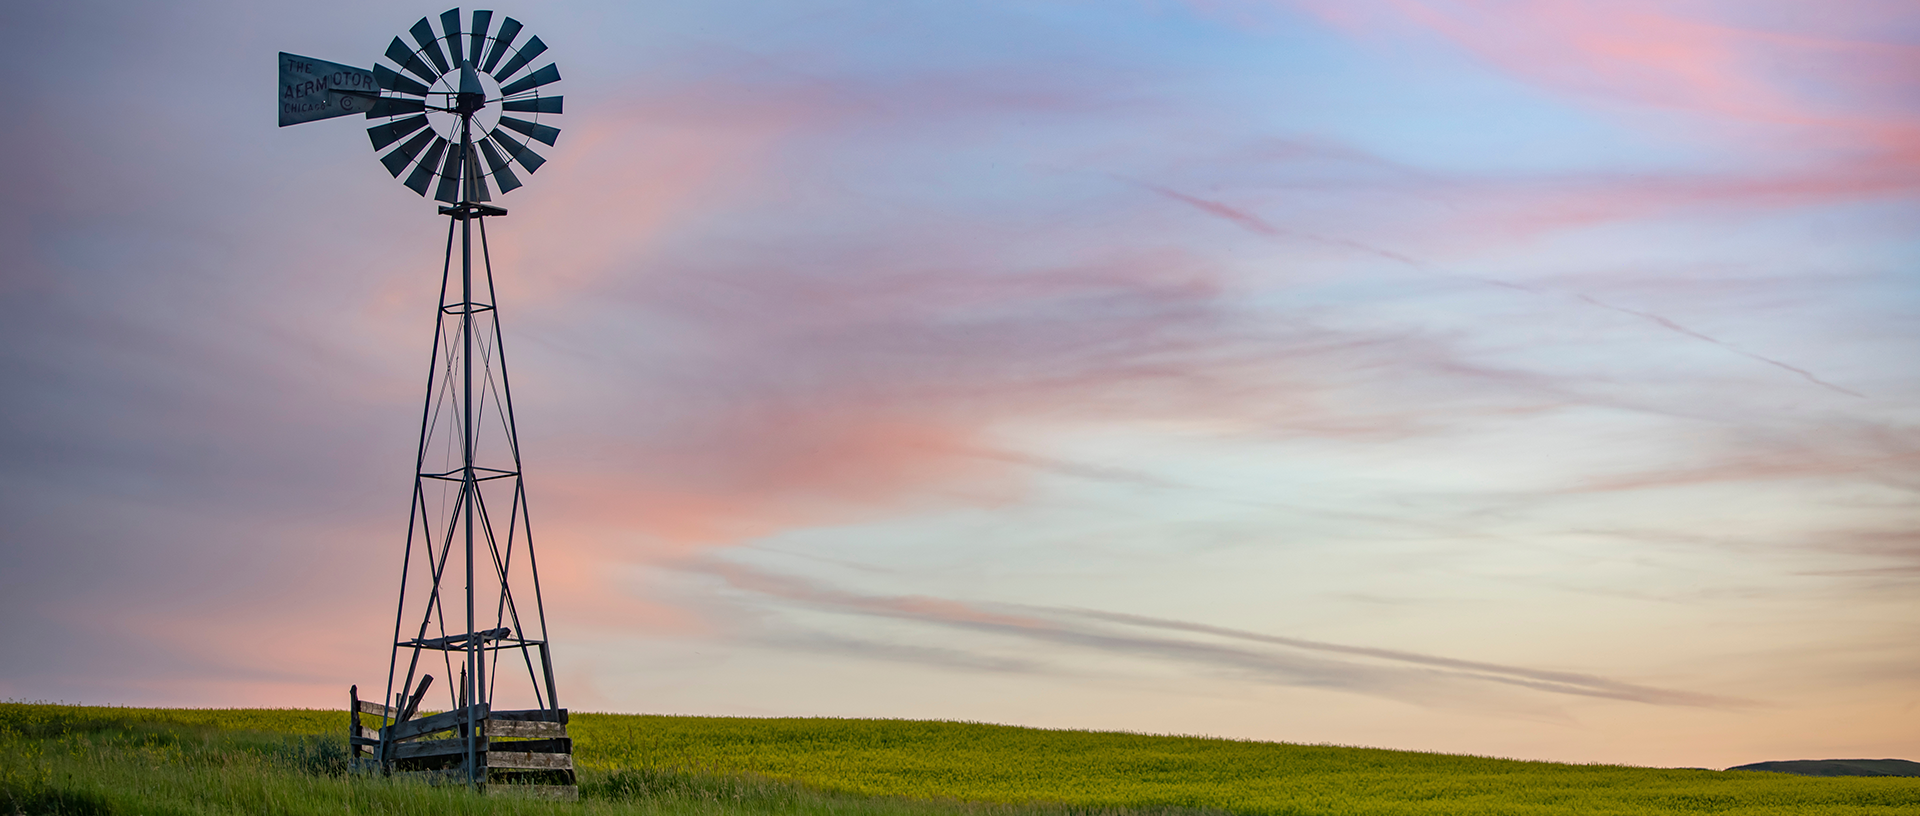 Windmill during sunset in a green field